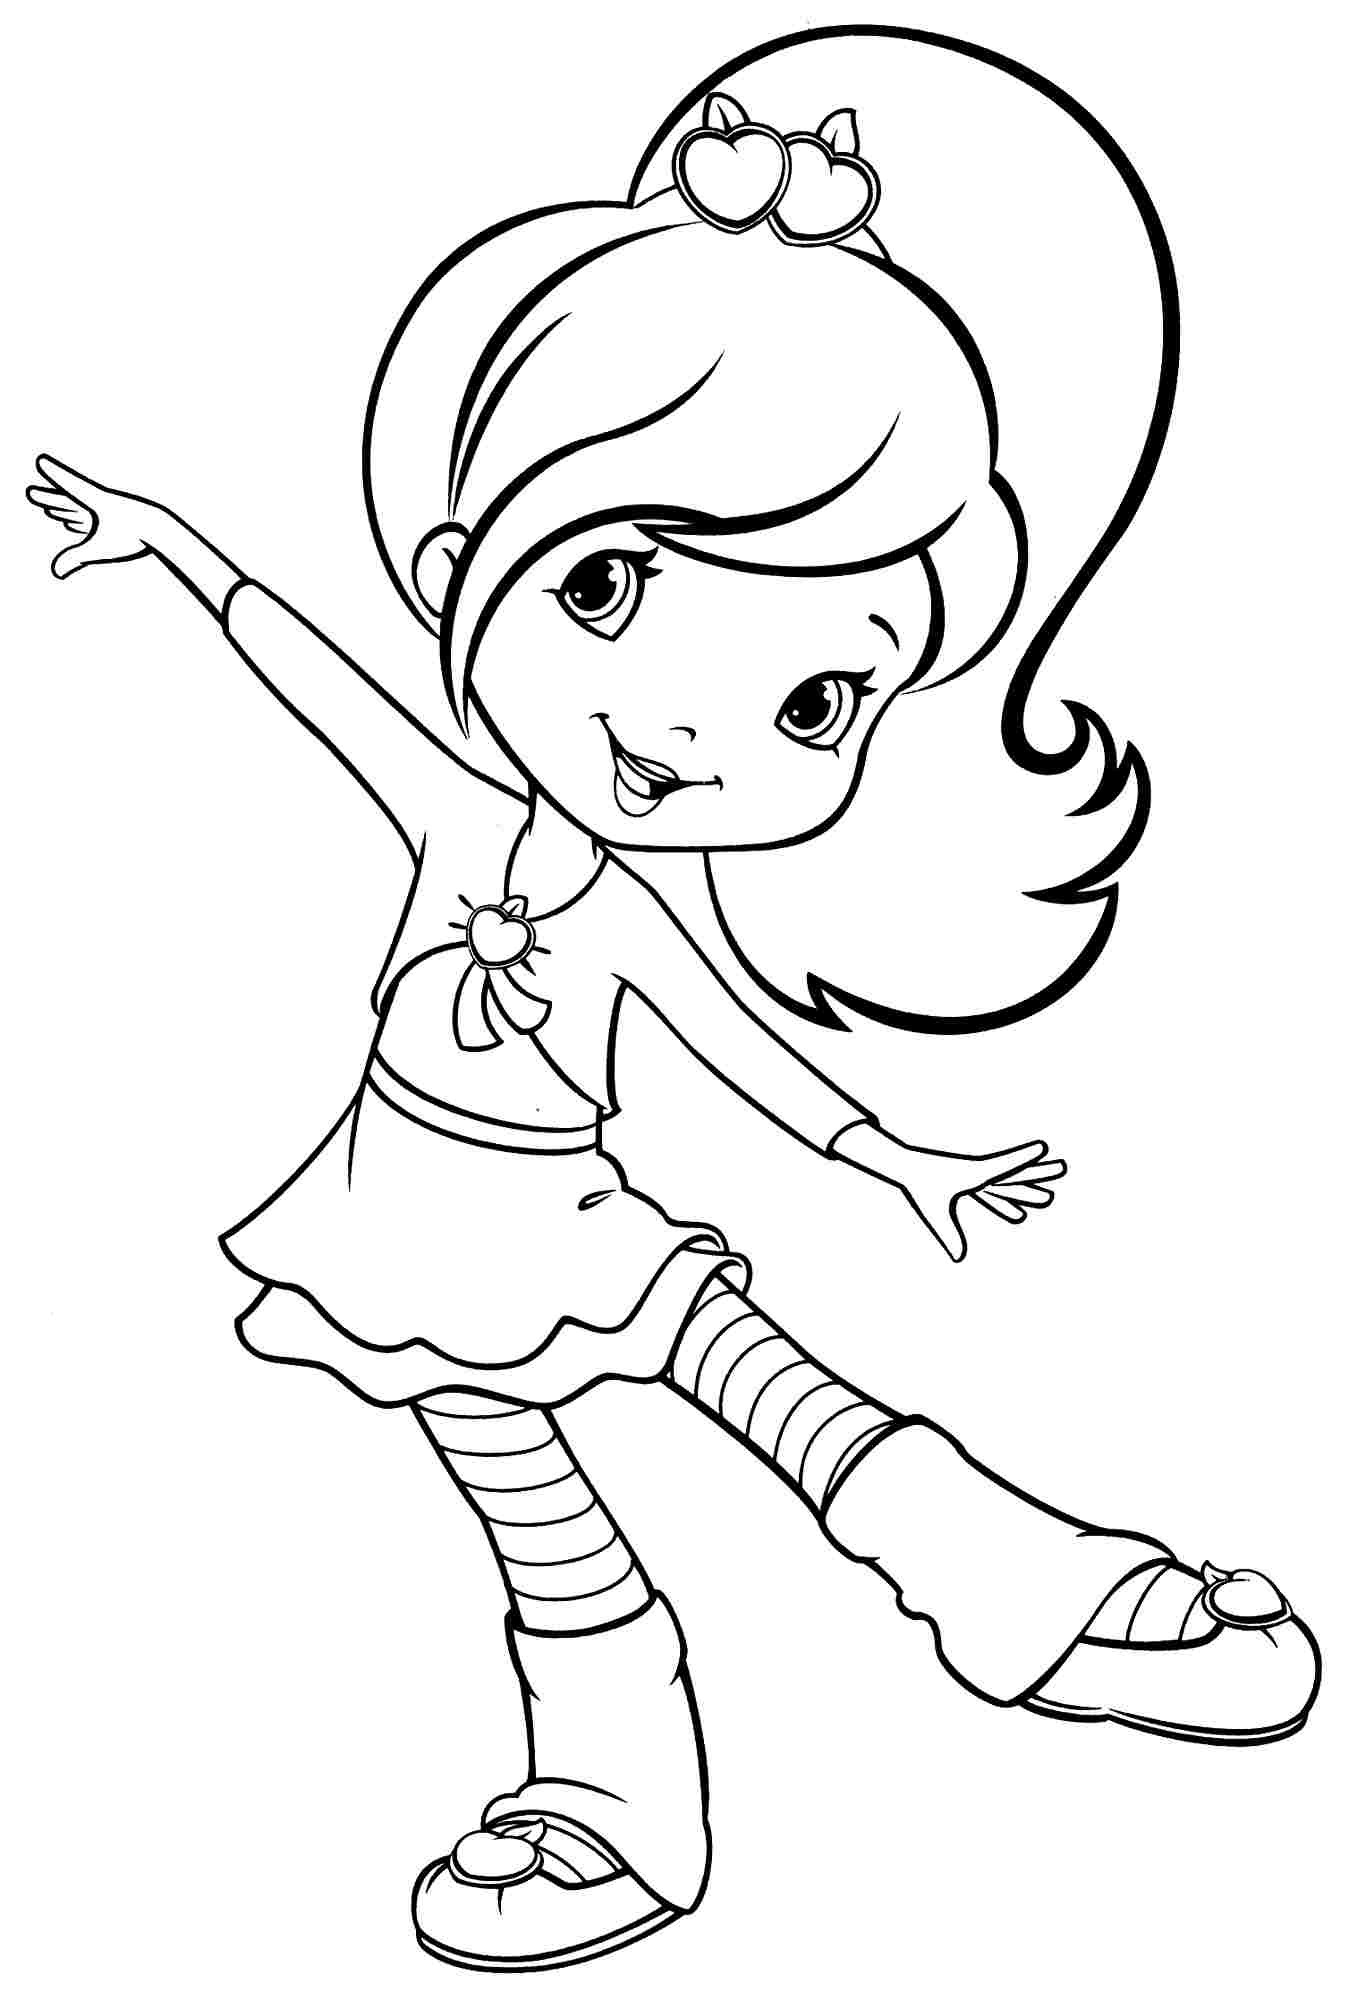 Free Printable Coloring Pages For Girls
 Coloring Pages for Girls Best Coloring Pages For Kids